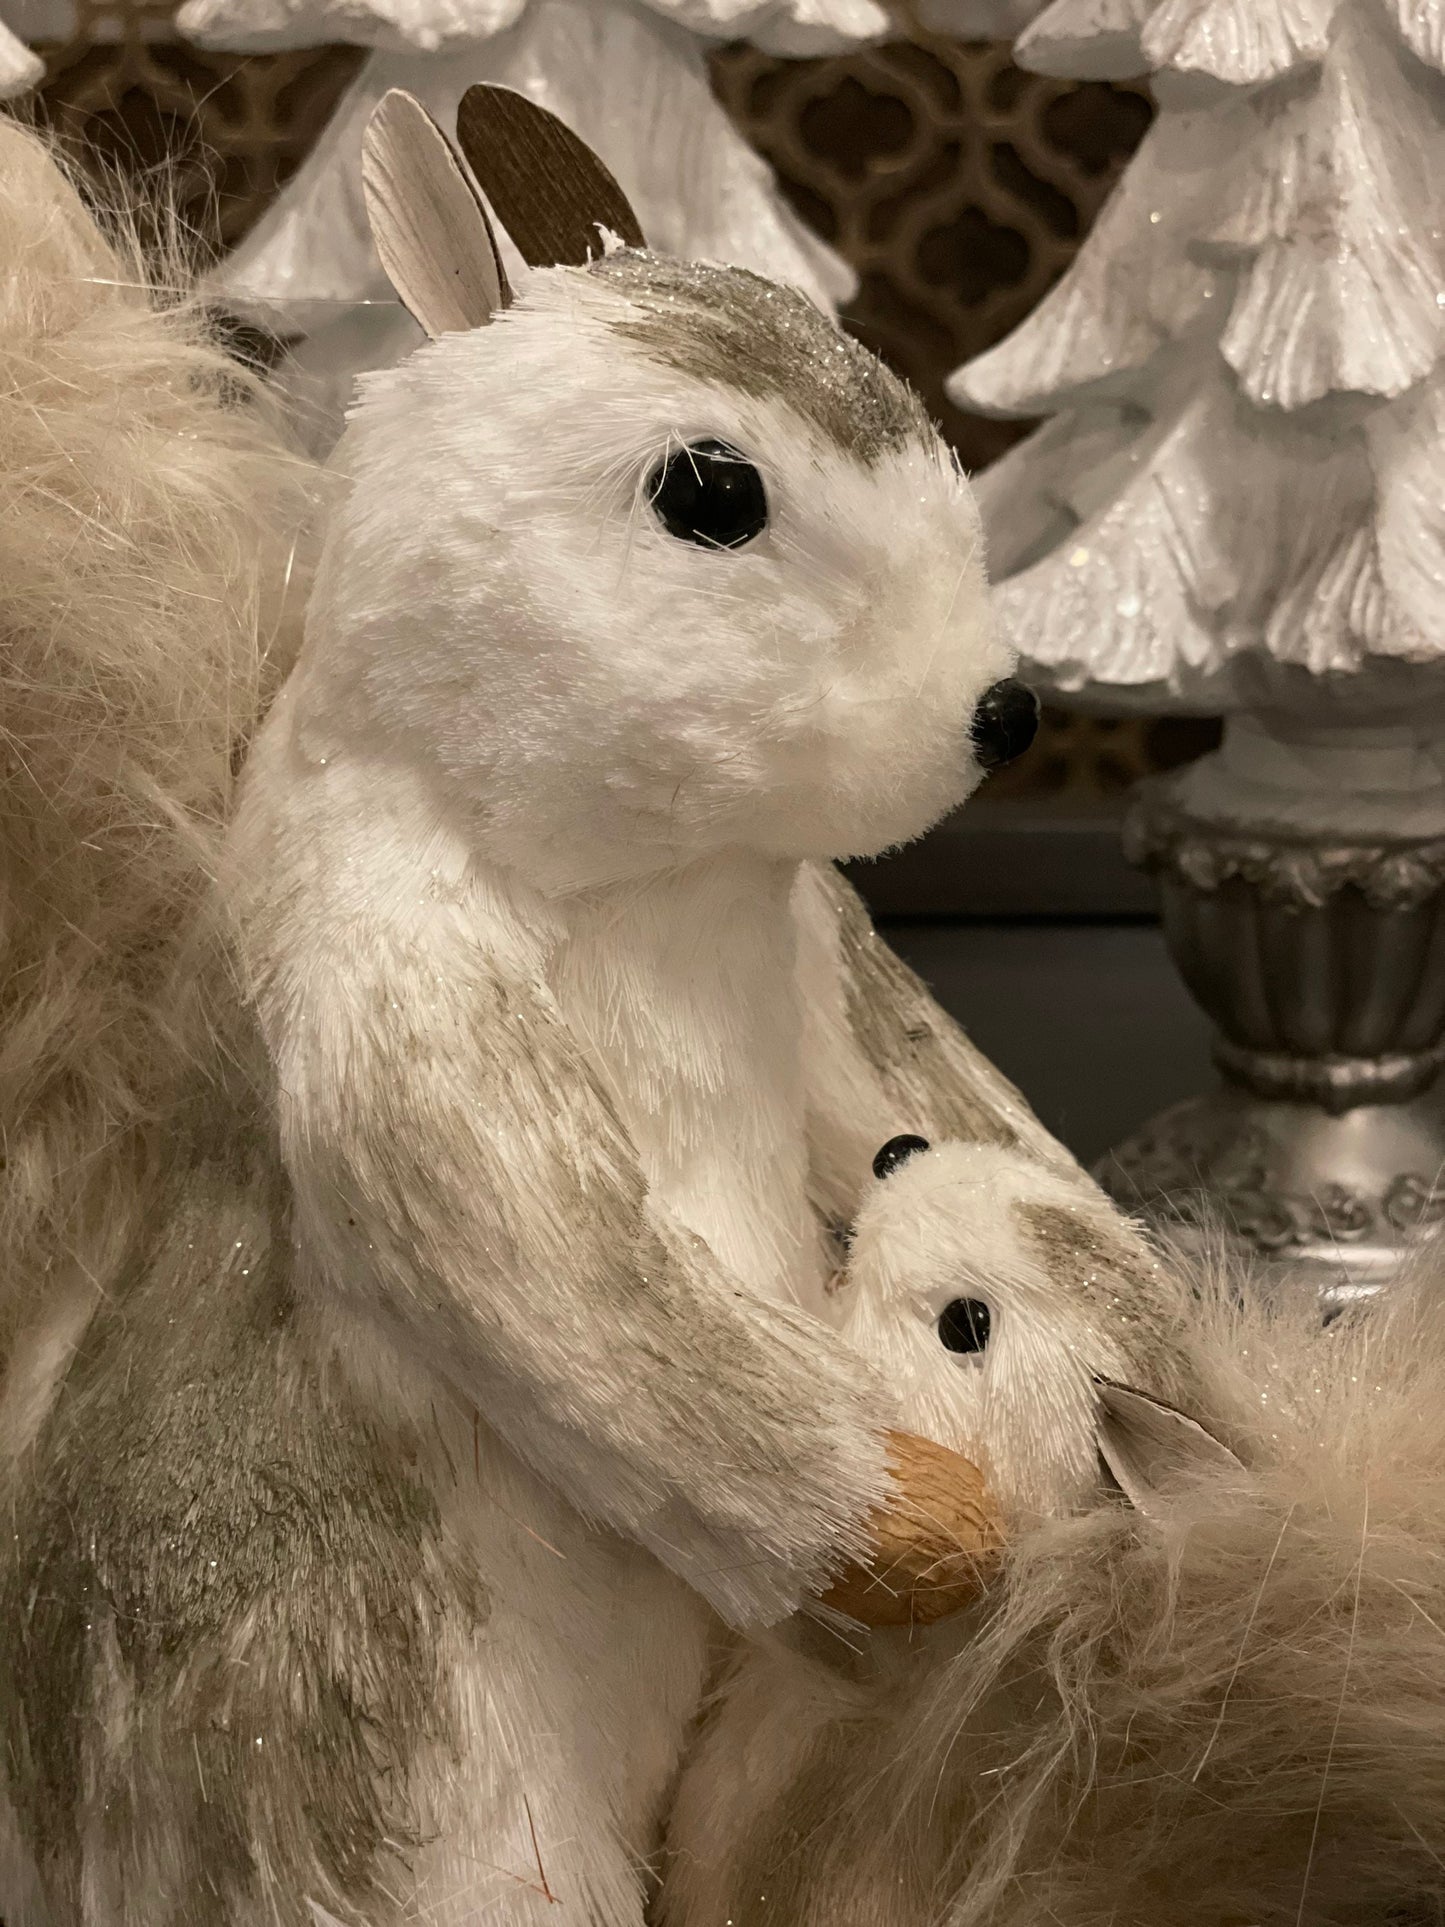 9.75” squirrel with baby ornament.